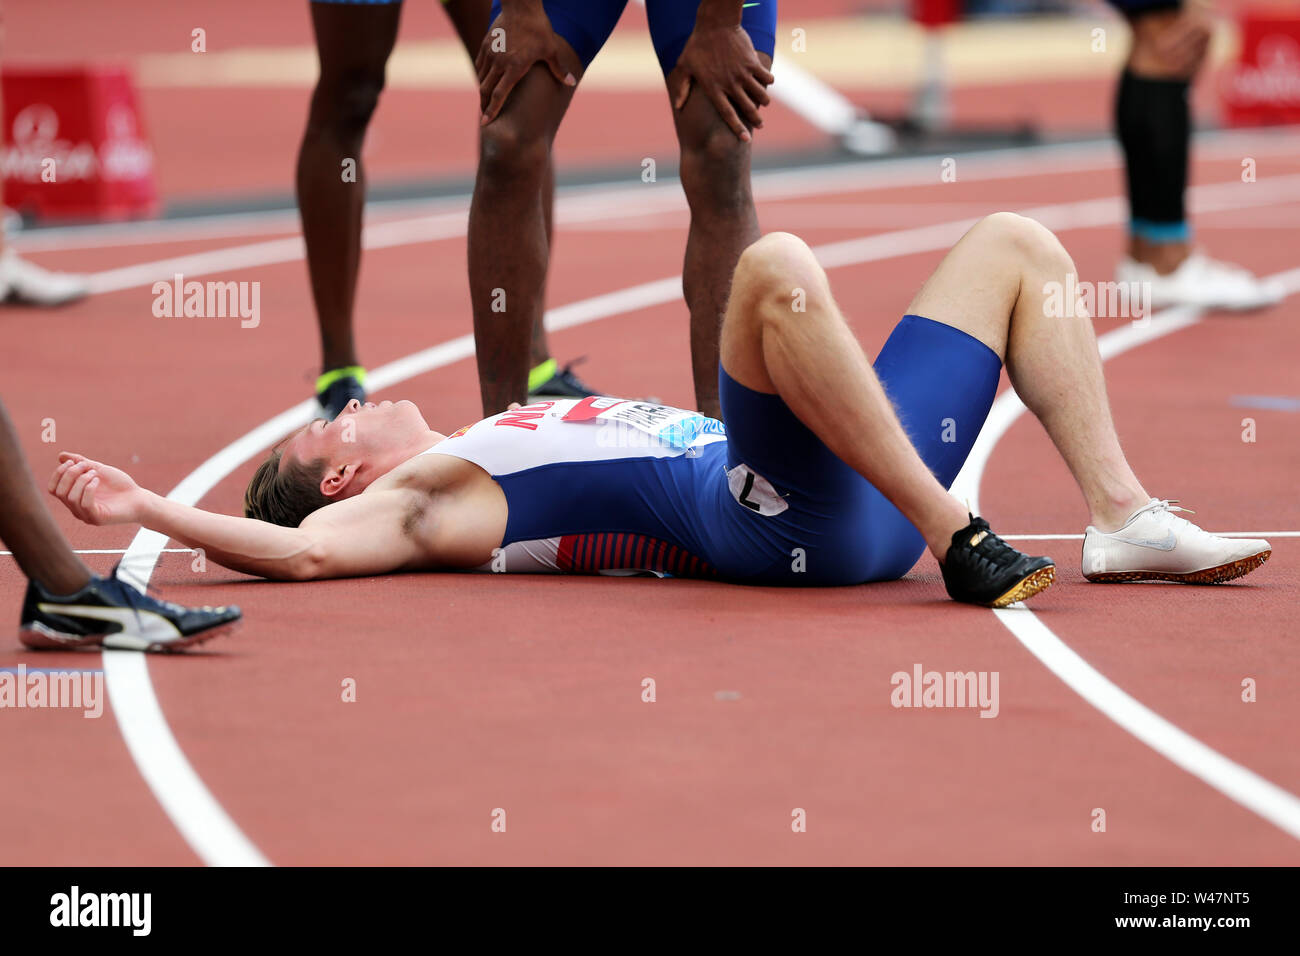 London, UK. 20th July 19. Karsten WARHOLM (Norway) exhausted after winning the Men's 400m Hurdles Final at the 2019, IAAF Diamond League, Anniversary Games, Queen Elizabeth Olympic Park, Stratford, London, UK. Credit: Simon Balson/Alamy Live News Stock Photo